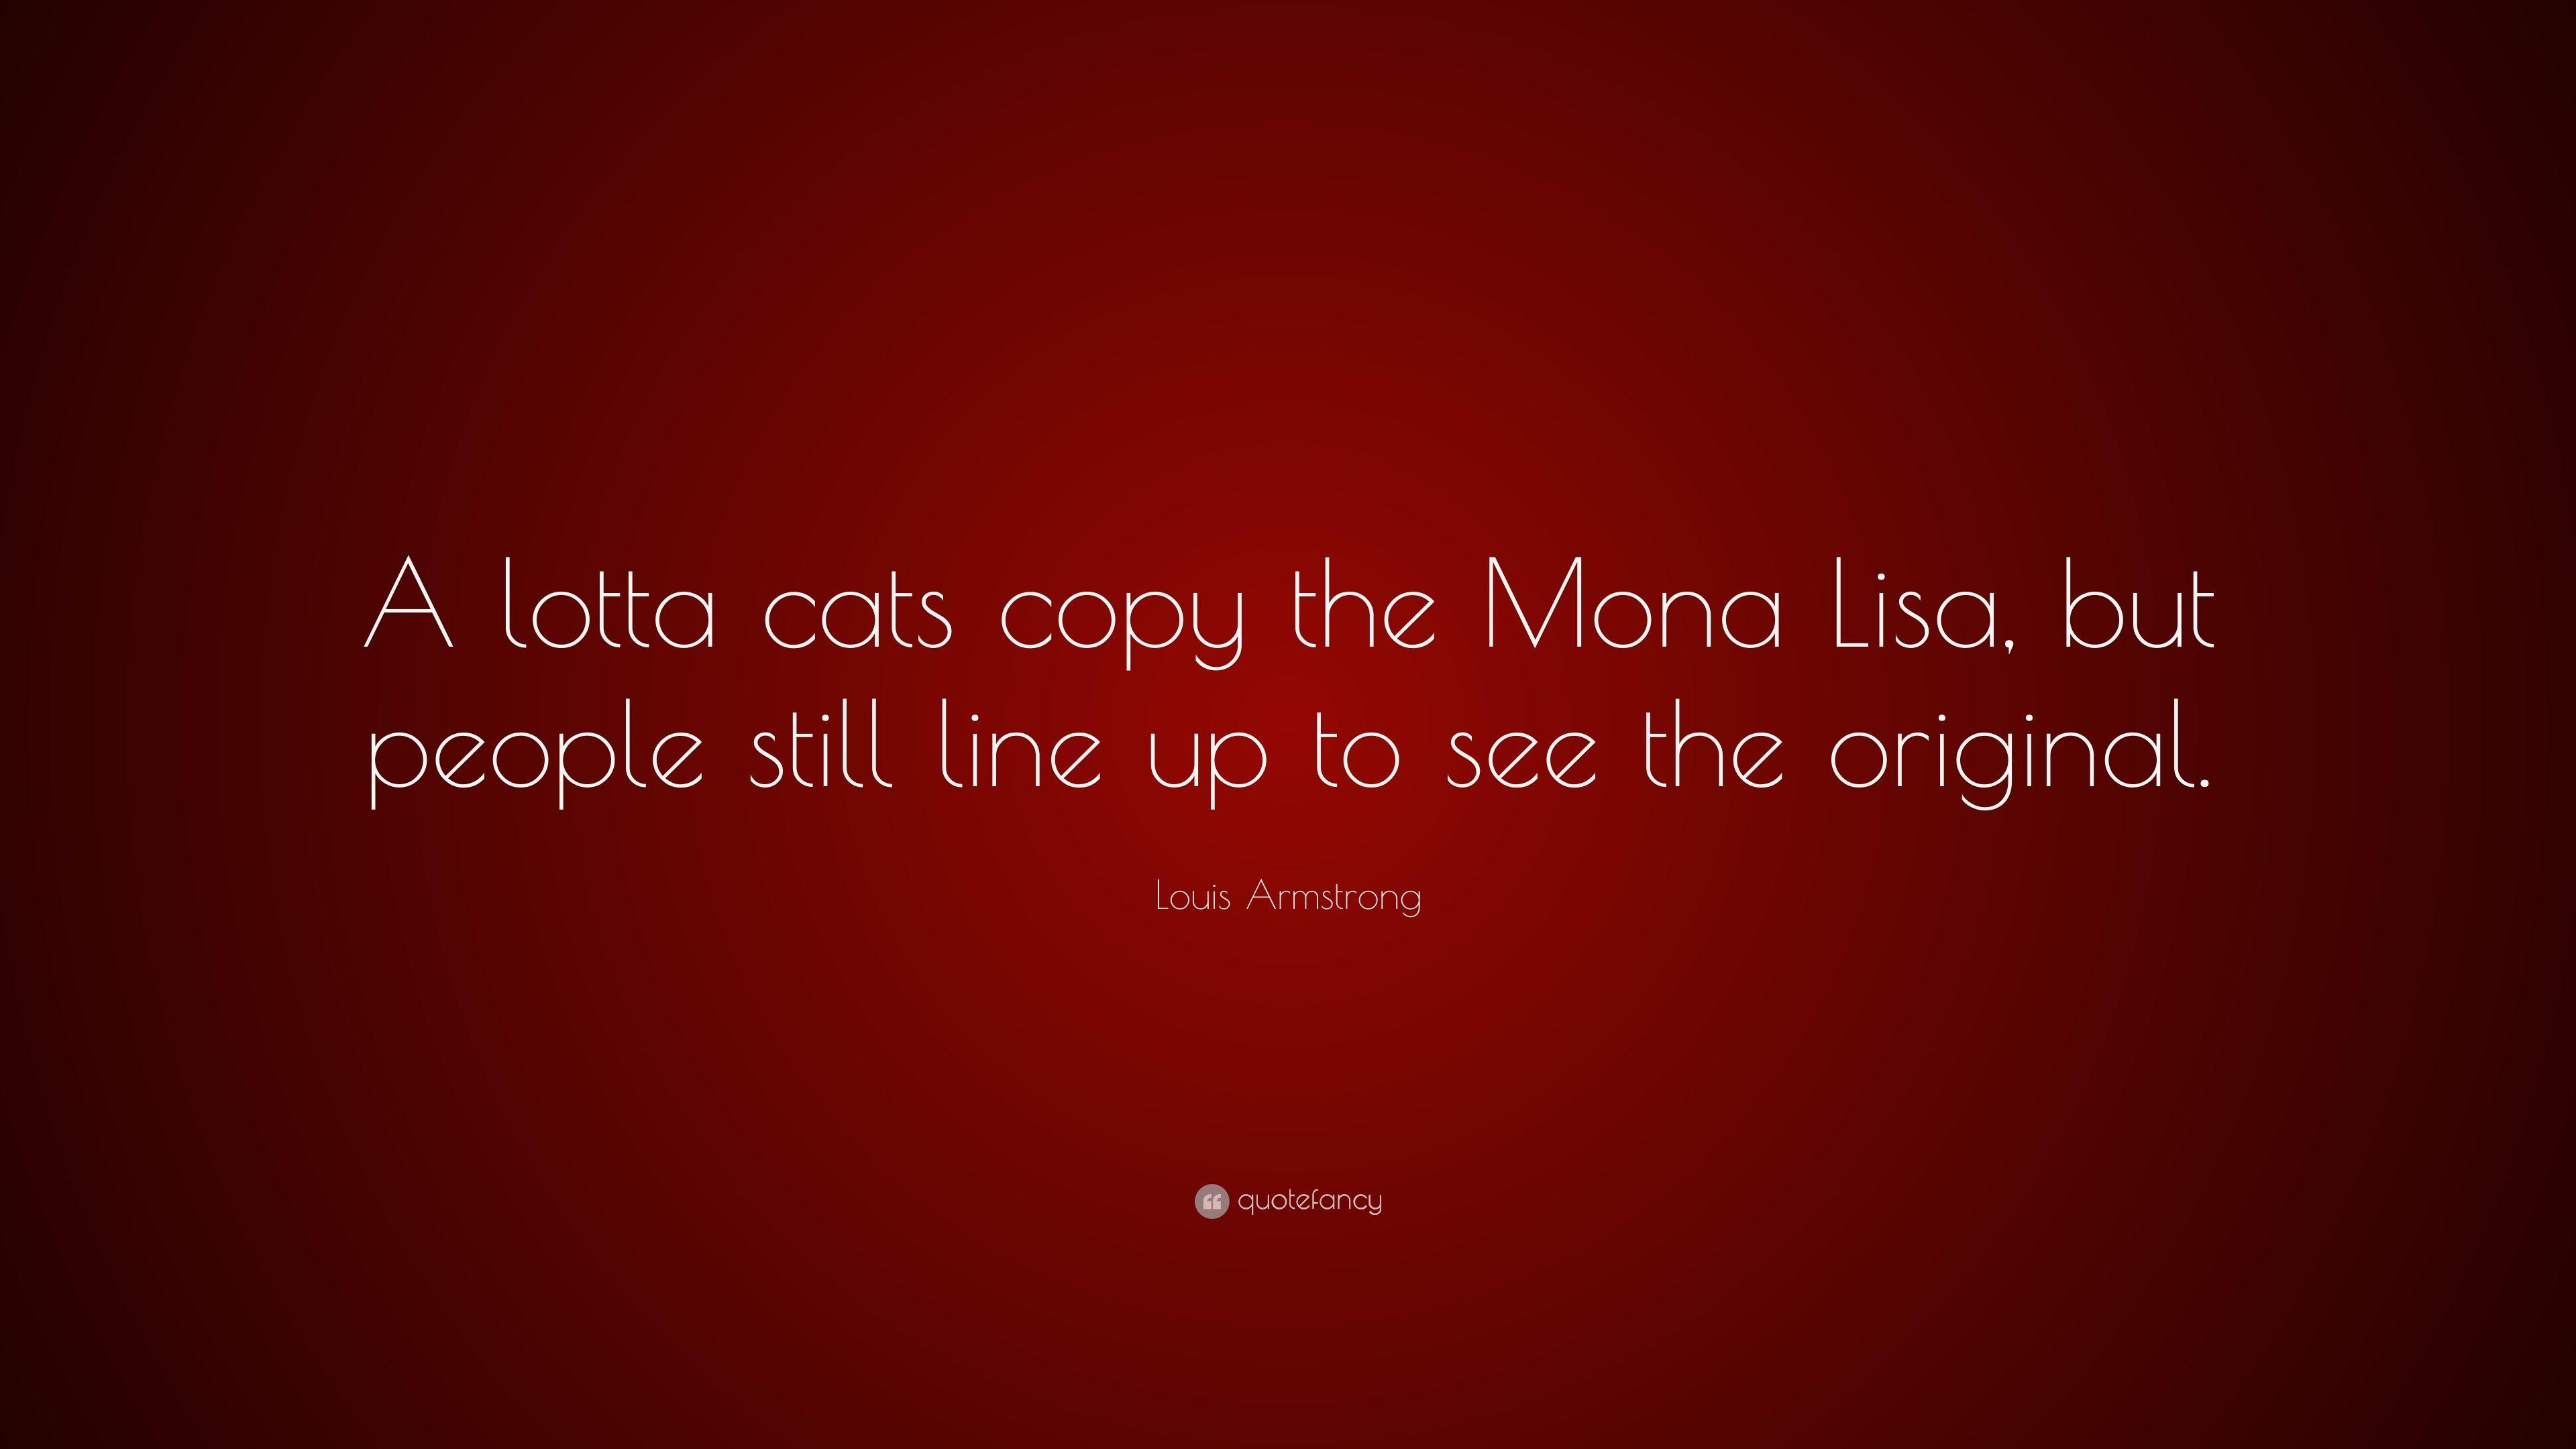 Louis Armstrong Quote: “A lotta cats copy the Mona Lisa, but people